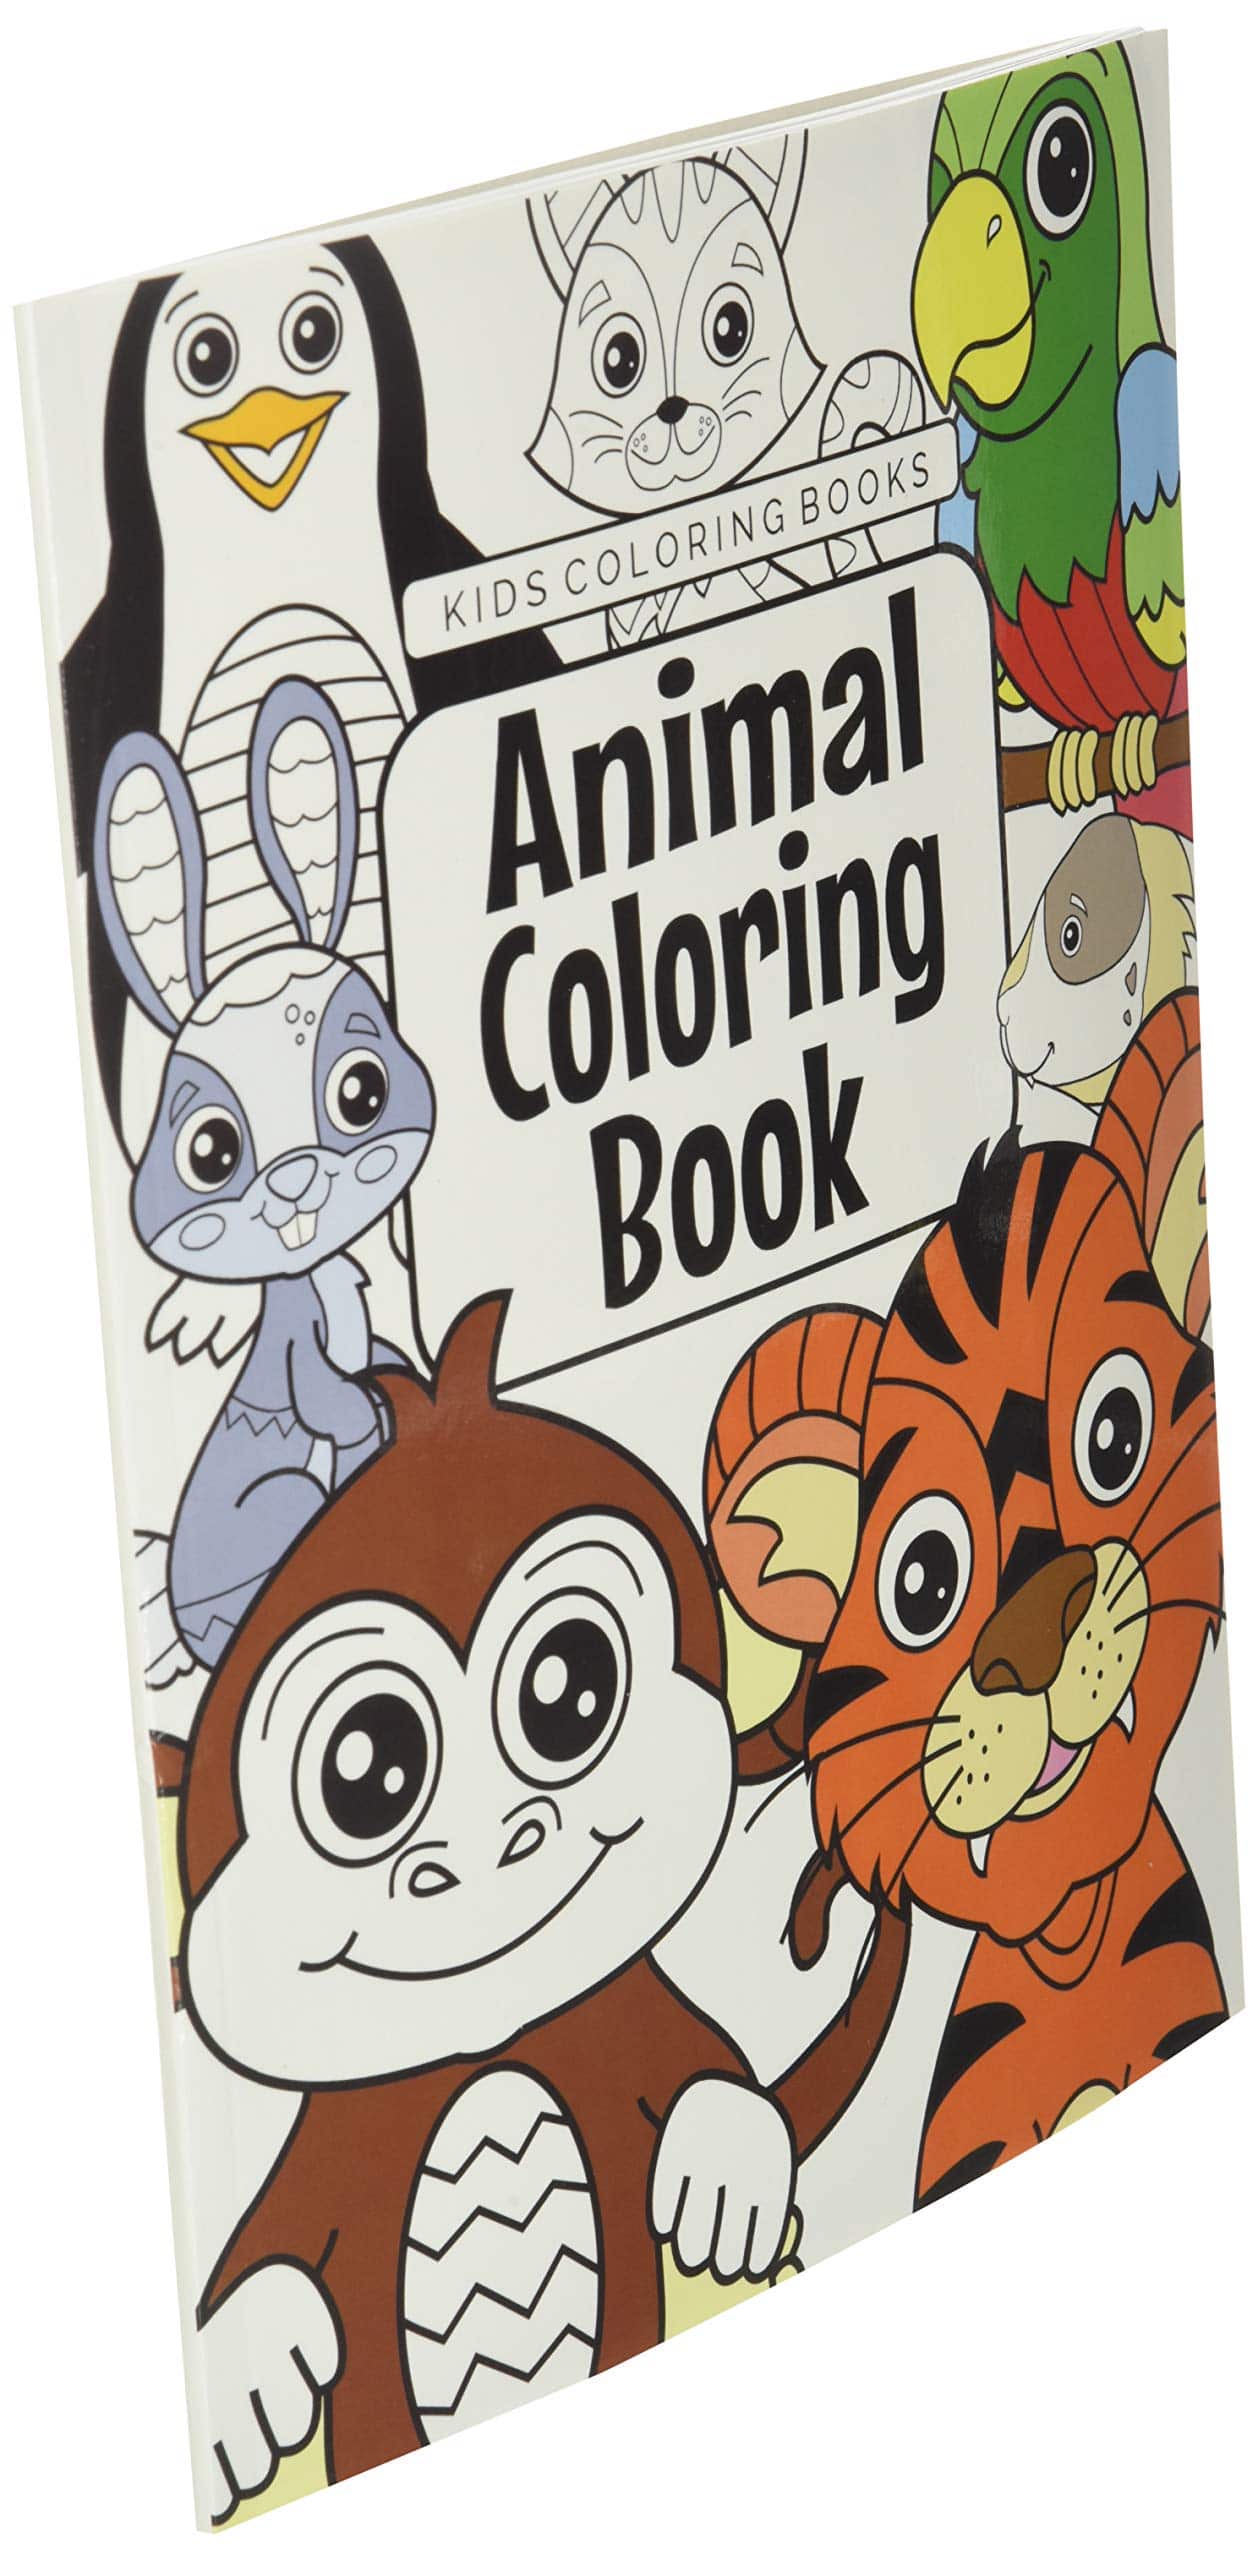 Kids Coloring Books, Animal Coloring Book side view